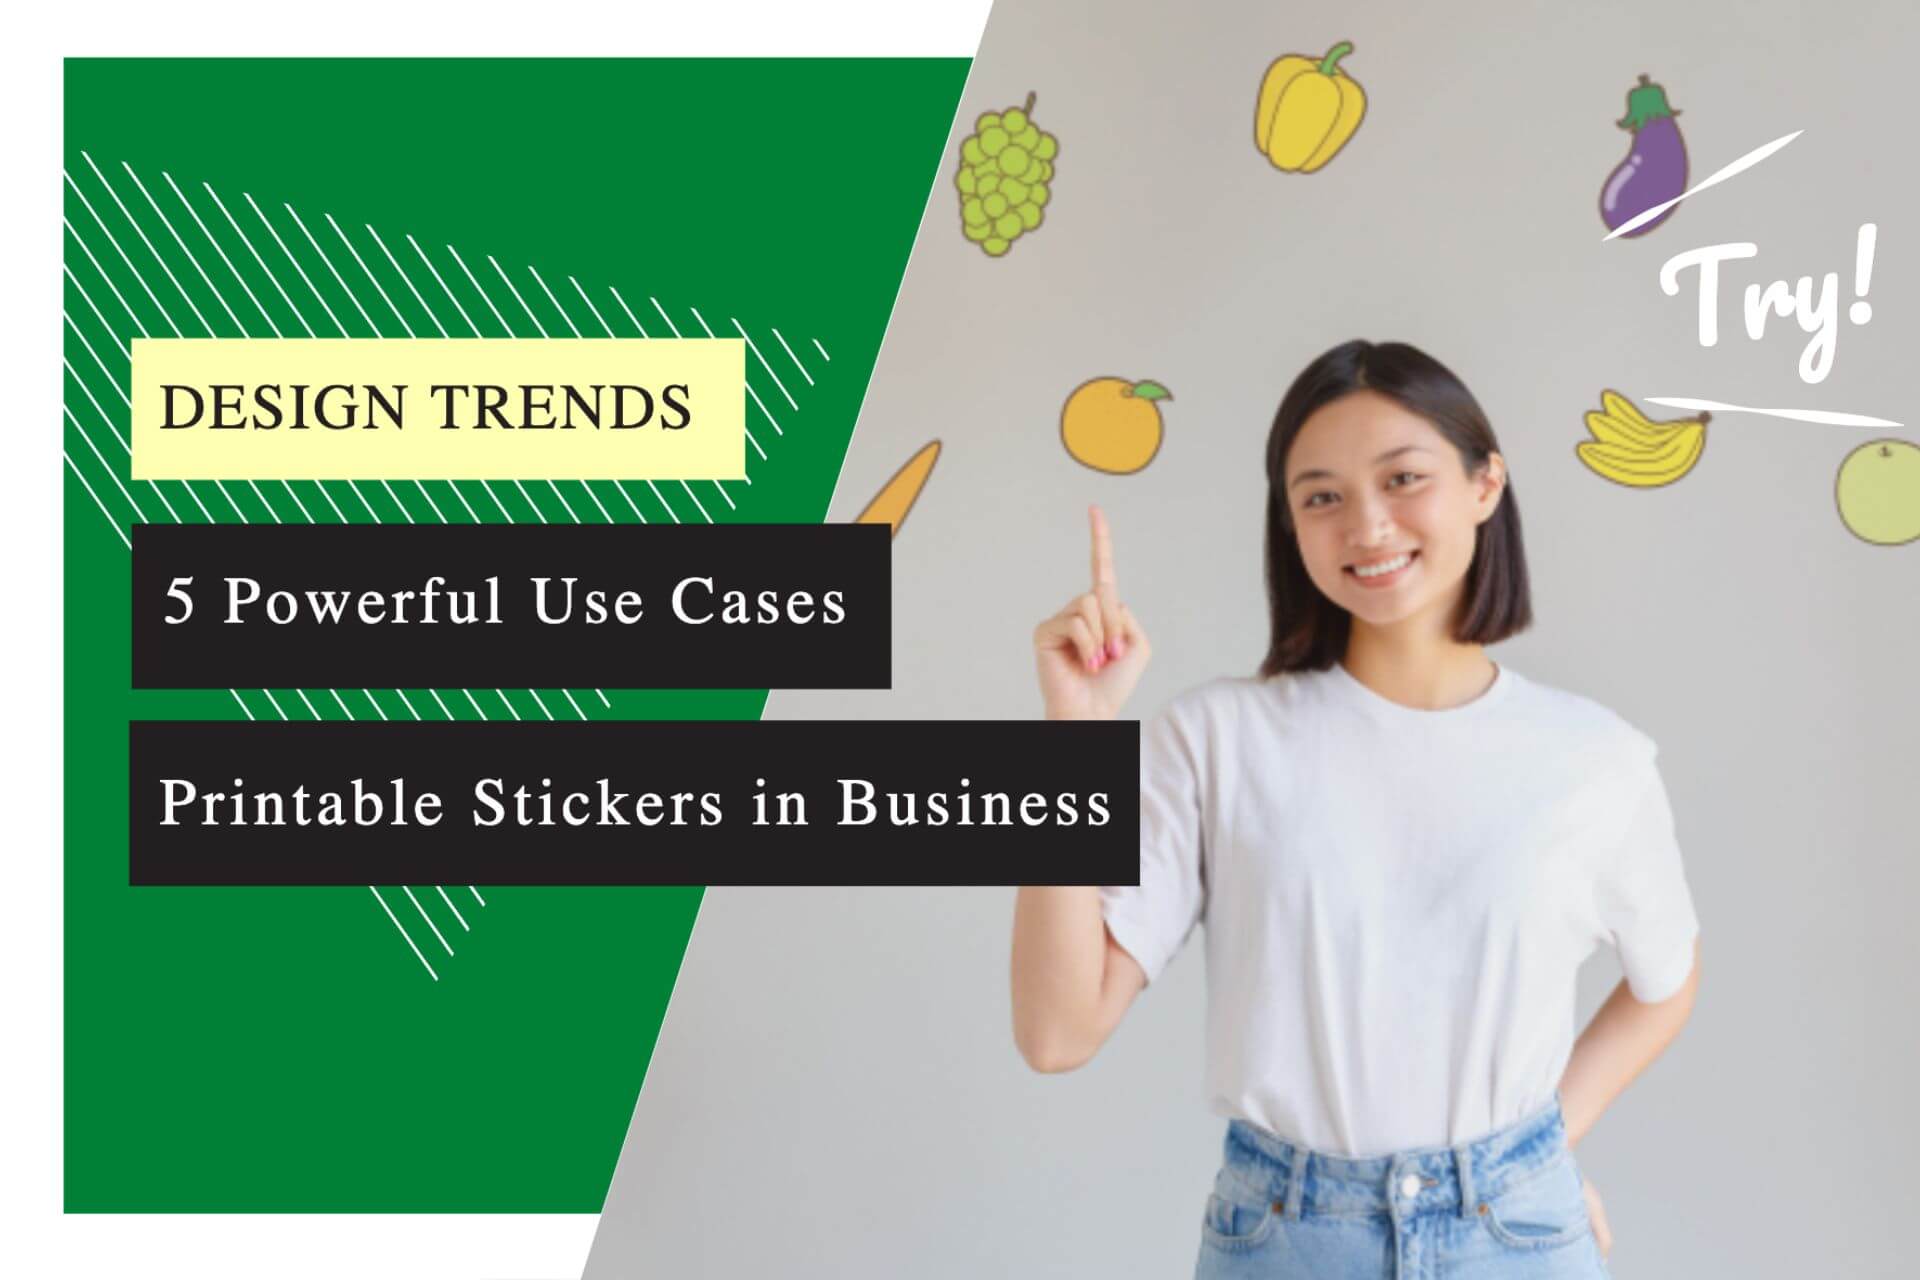 5 Powerful Use Cases of Printable Stickers in Business